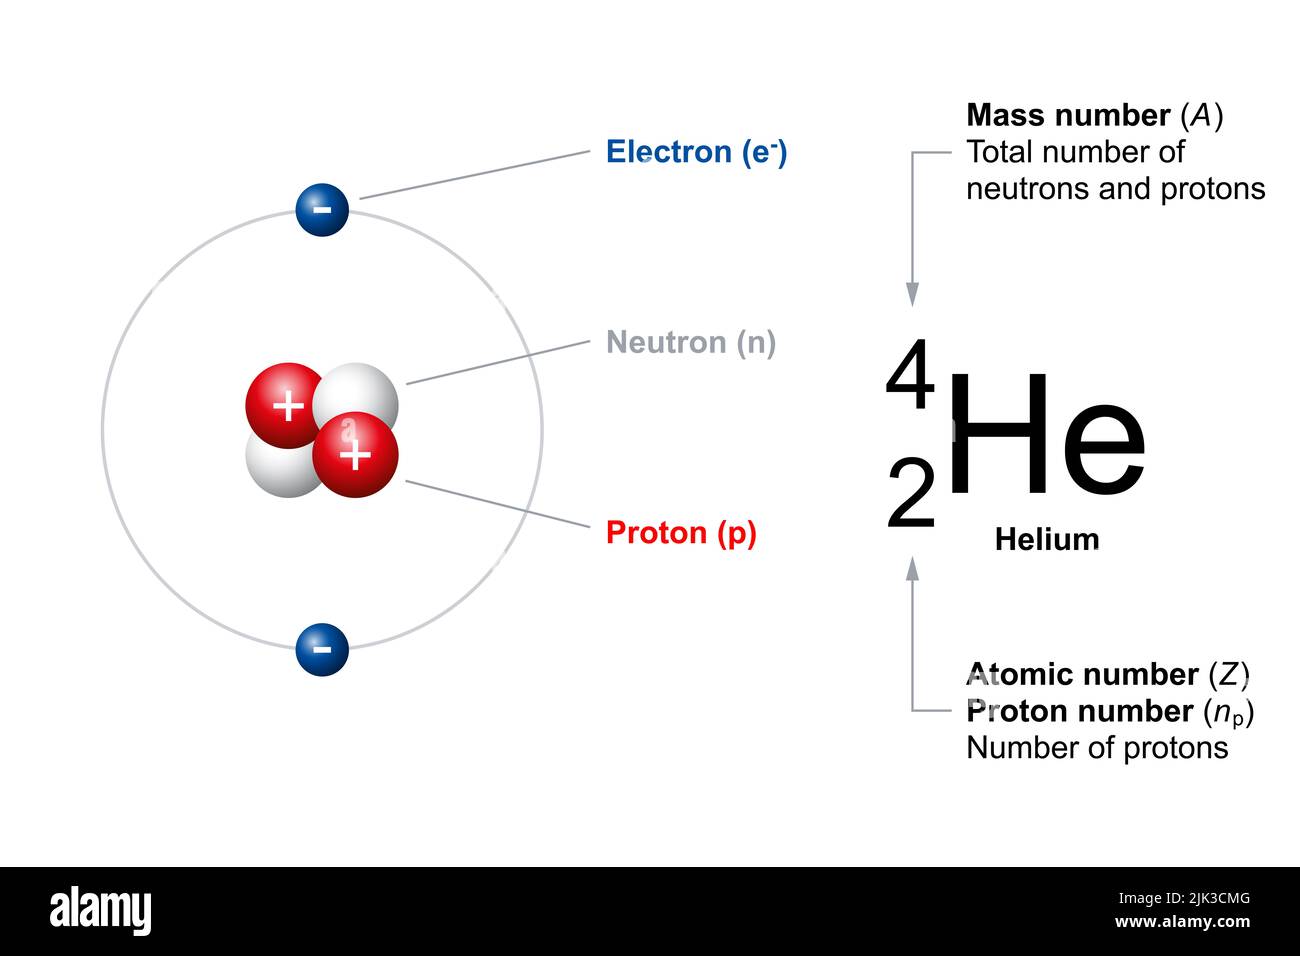 Atomic number and mass number of ordinary atoms, using helium as an example. The atomic number (Z) is also the number of protons (np). Stock Photo